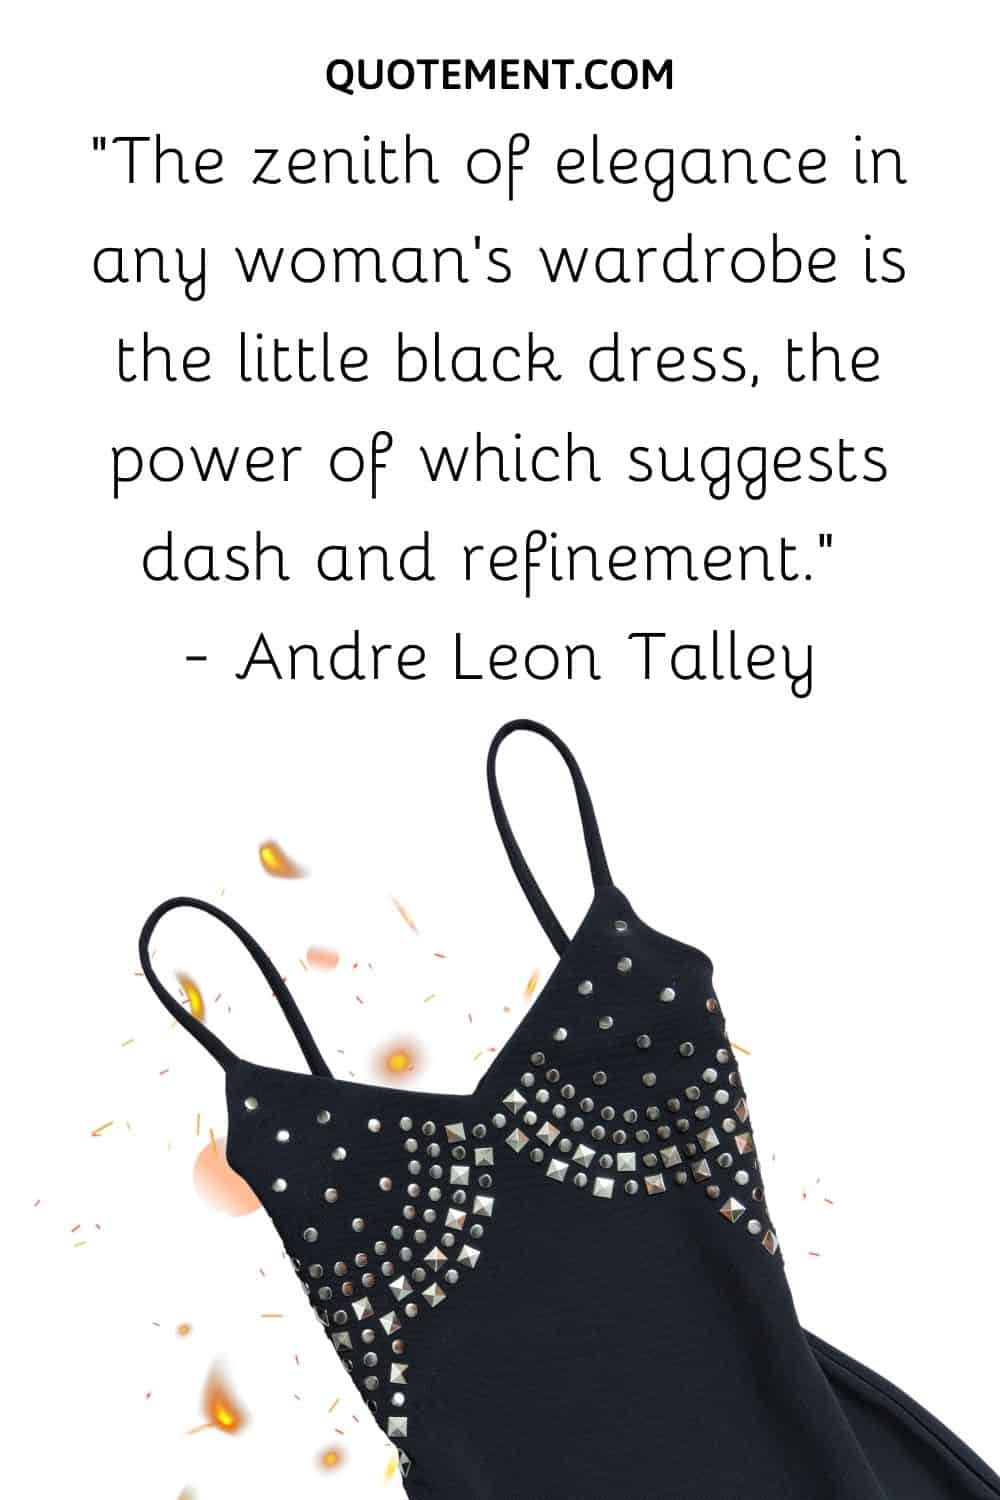 “The zenith of elegance in any woman’s wardrobe is the little black dress, the power of which suggests dash and refinement.” — Andre Leon Talley